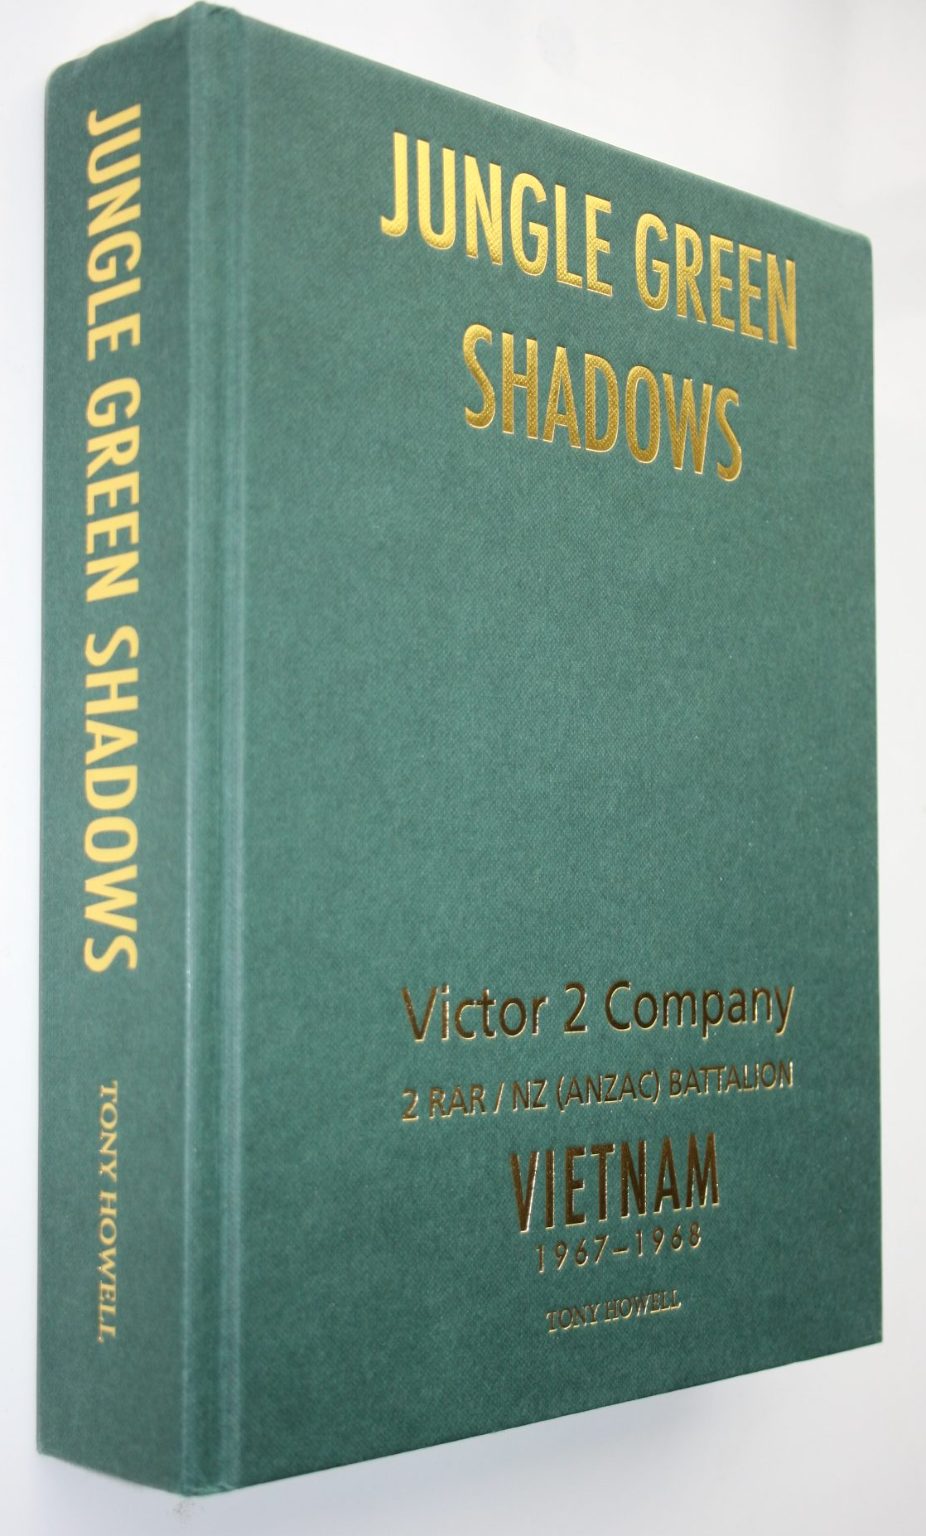 Jungle Green Shadows. Victor 2 Company 2 RAR / NZ (ANZAC) Battalion Vietnam 1967-1968 by Tony Howell. VERY SCARCE AND OUT OF PRINT.